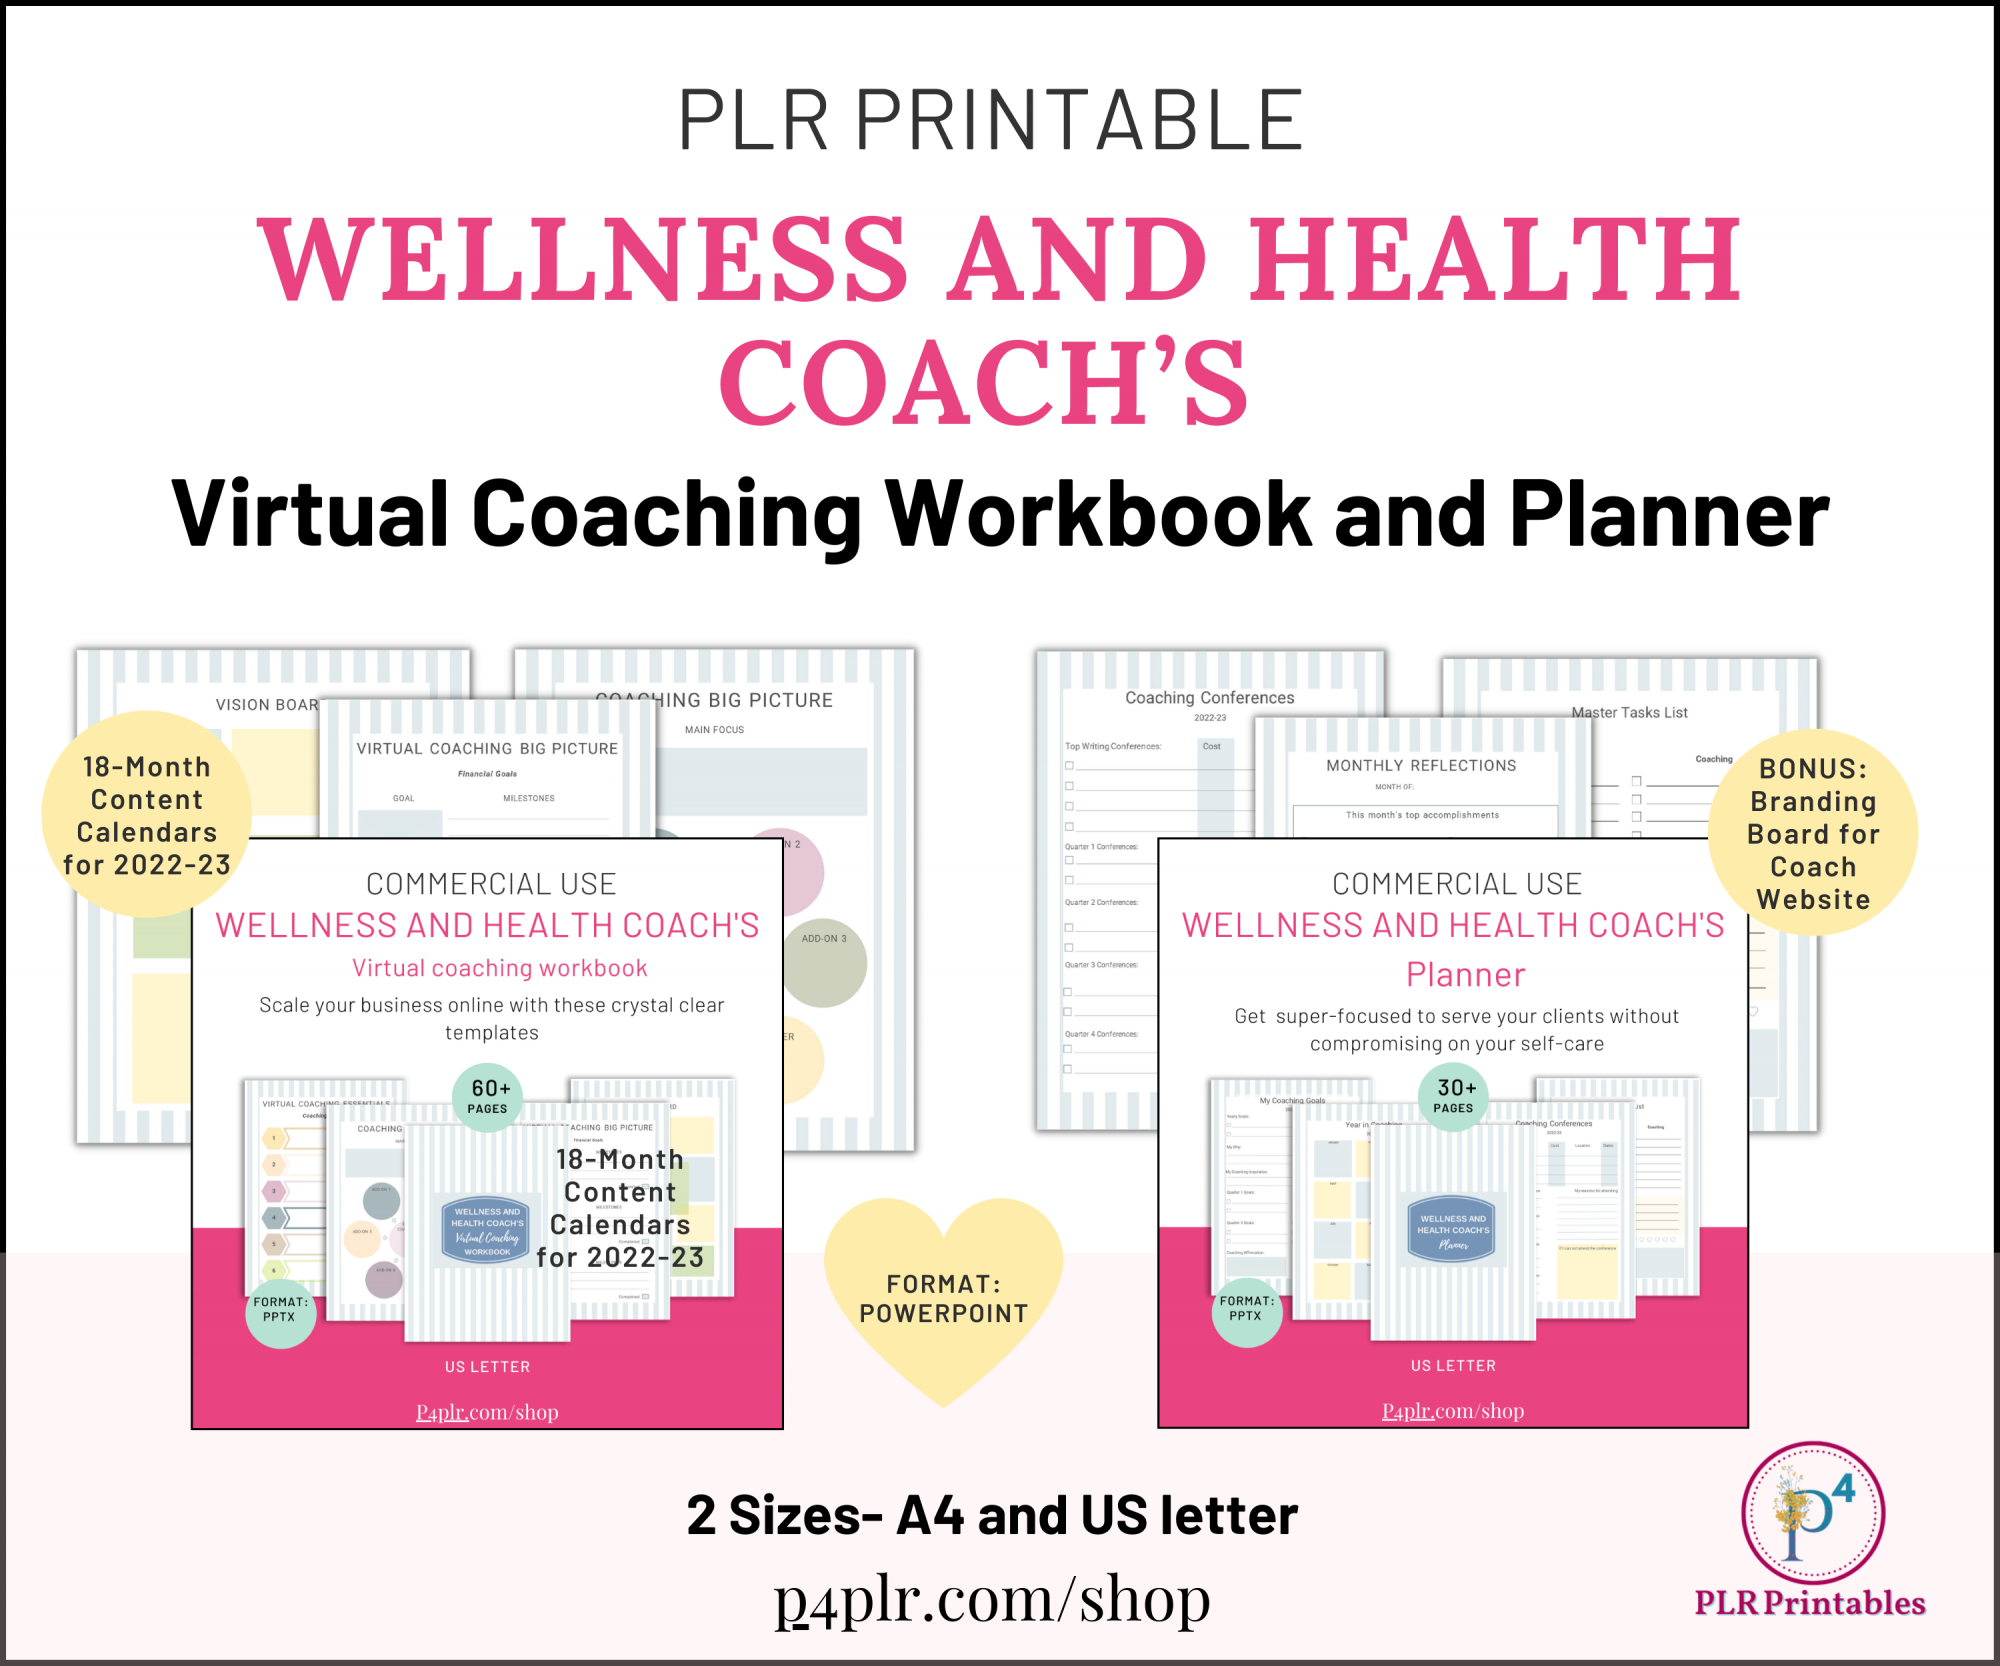 NEW! Wellness and Health Coach’s Virtual Coaching Workbook and Planner